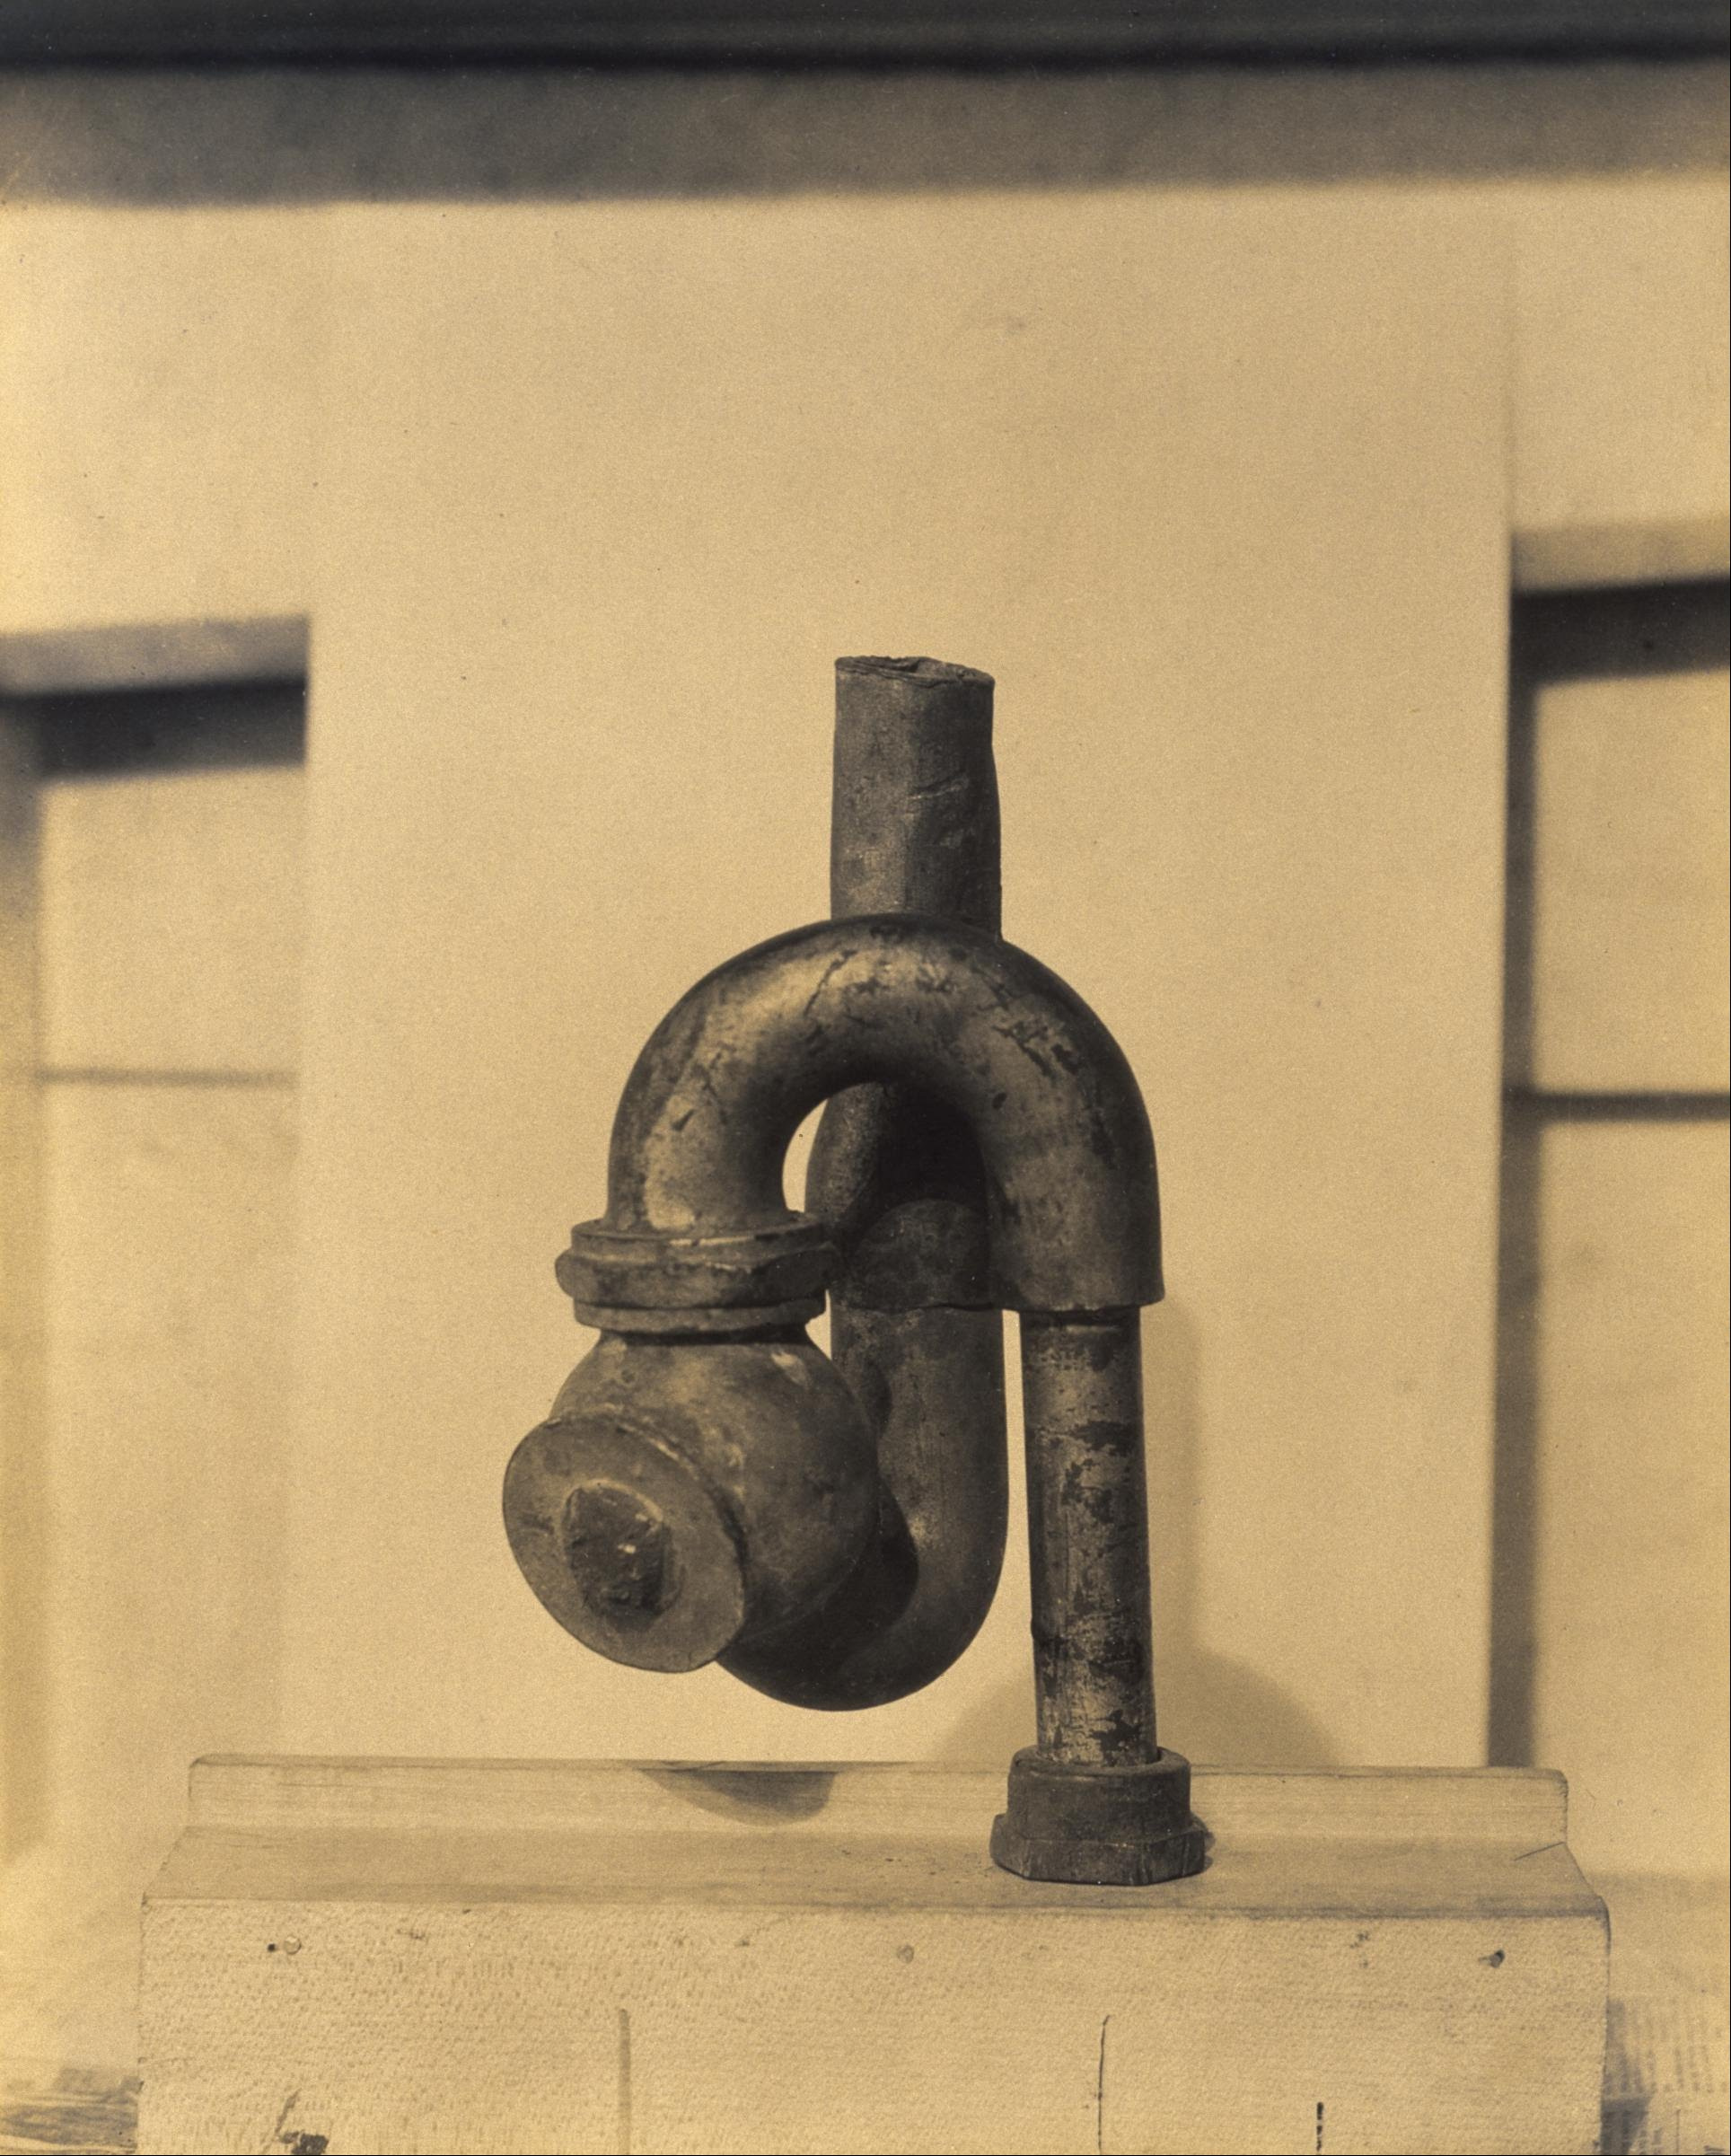 A work by Baroness Elsa von Freytag-Loringhoven and Morton Schamberg